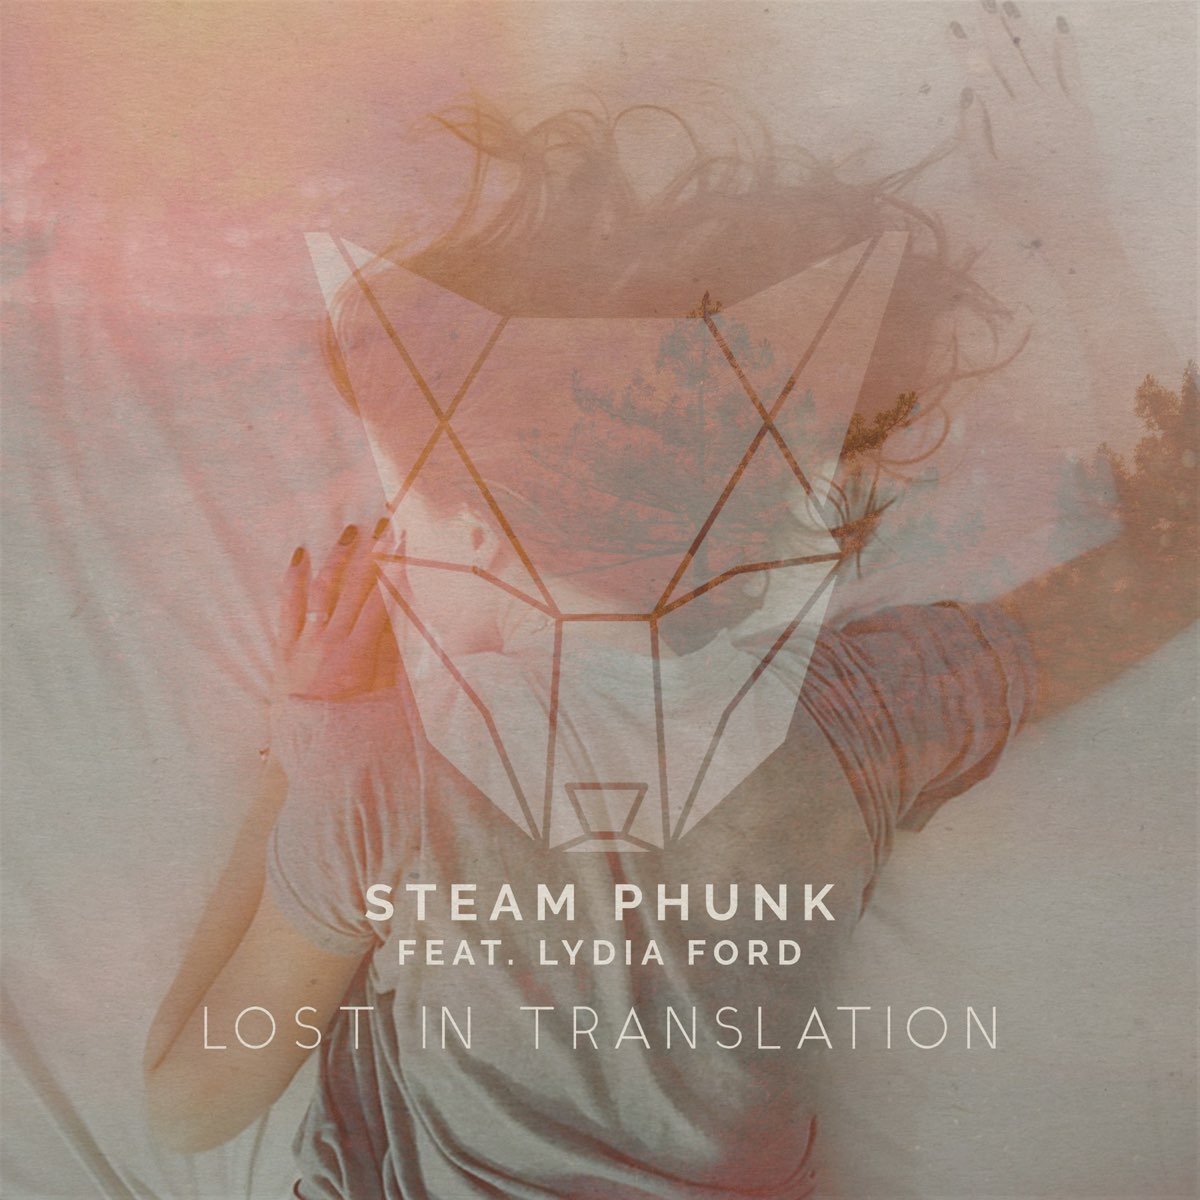 Steam phunk ft lydia ford lost in translation